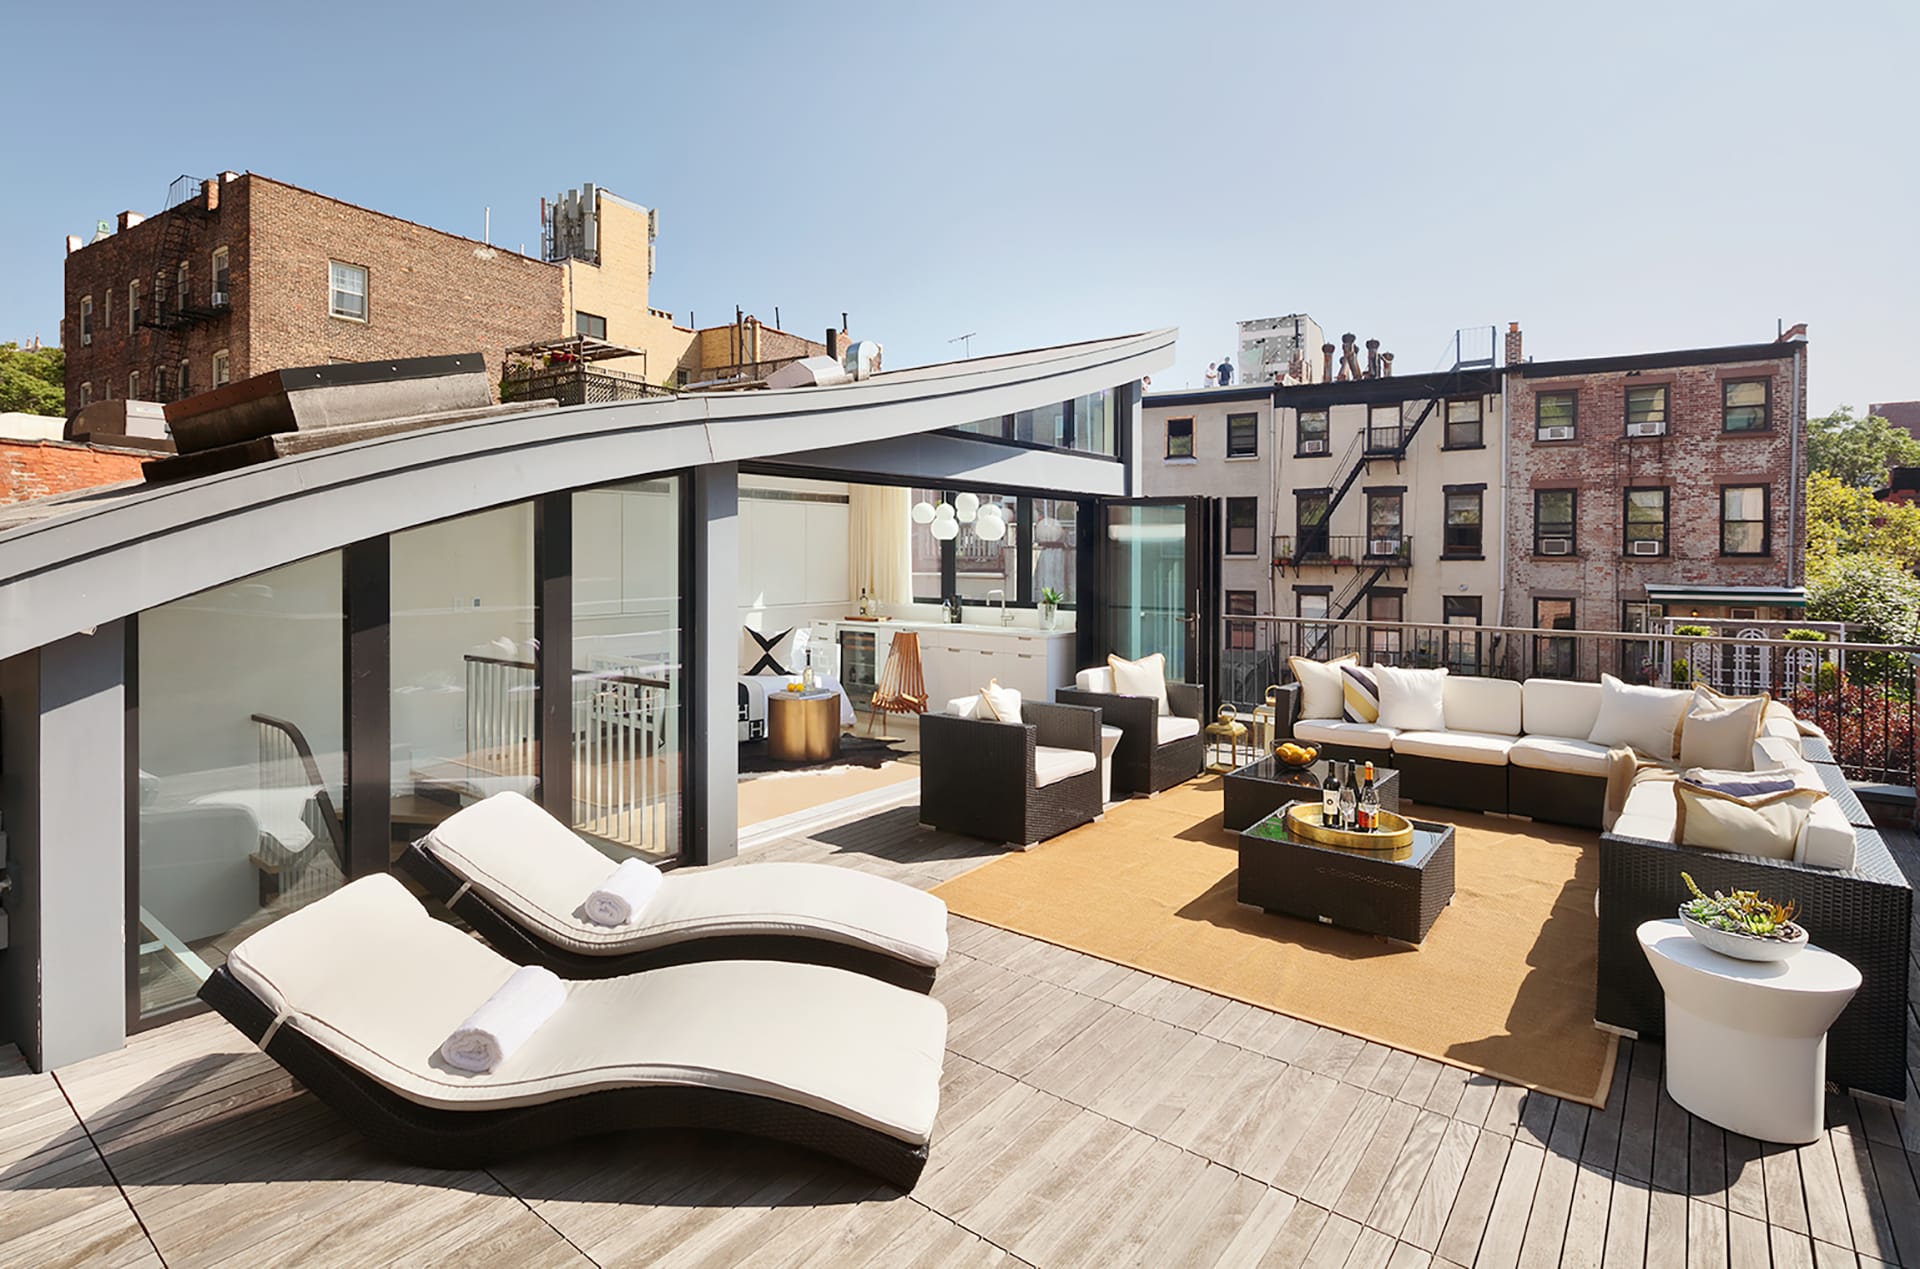 New penthouse with a curved roofline and finished roof deck on top of a Brooklyn Heights carriage house